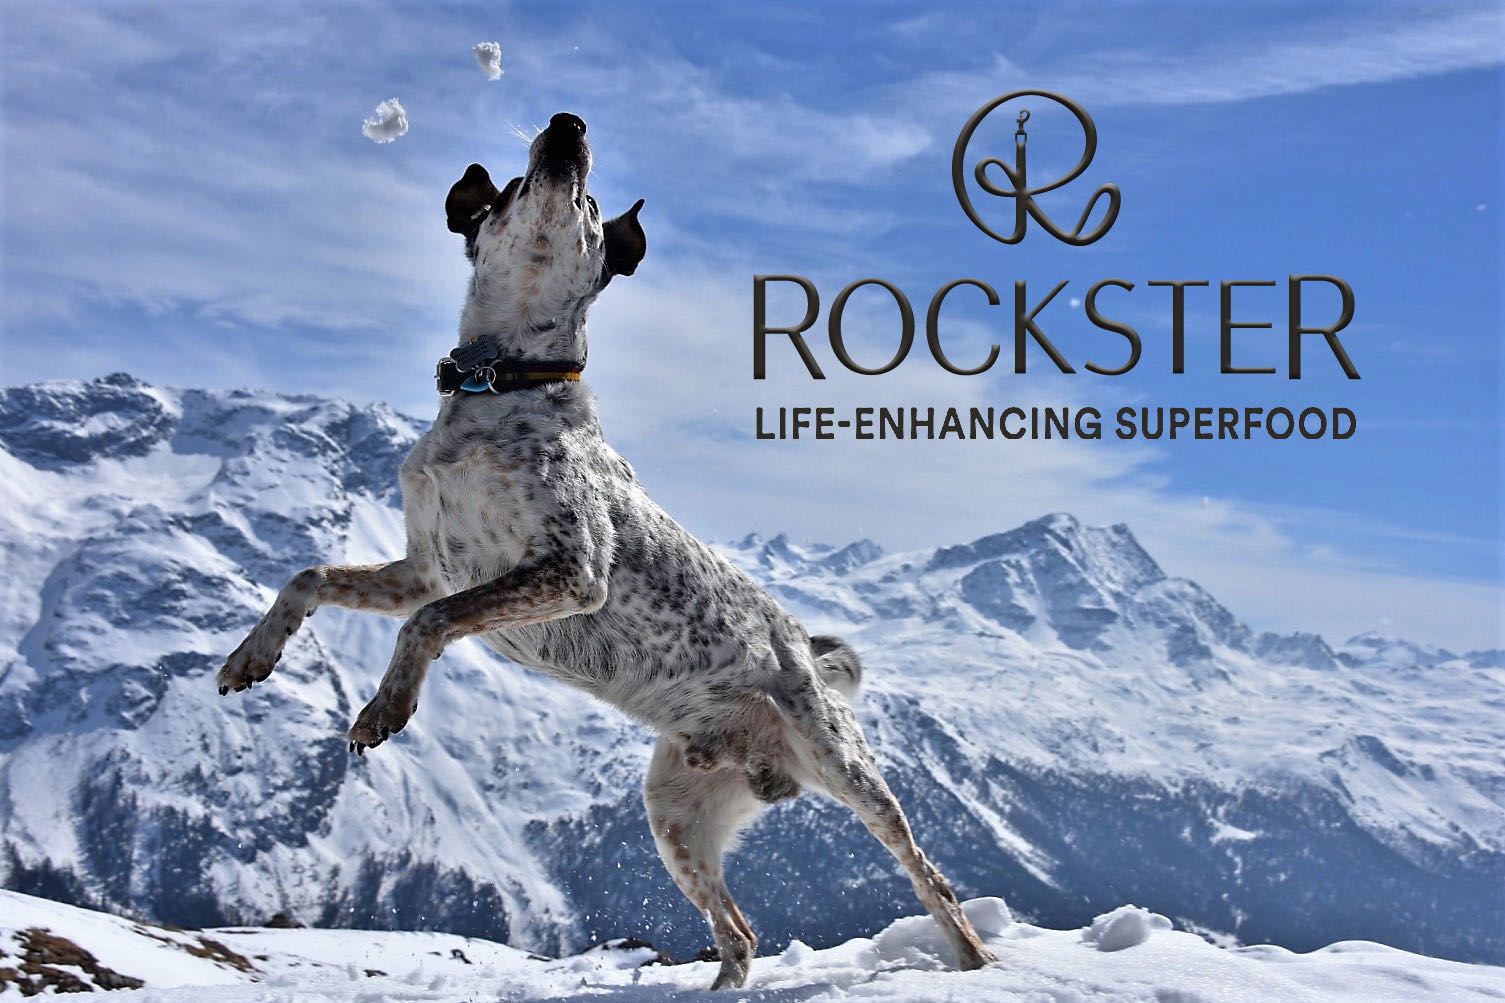 Rockster Jumping to catch snowballs with logo